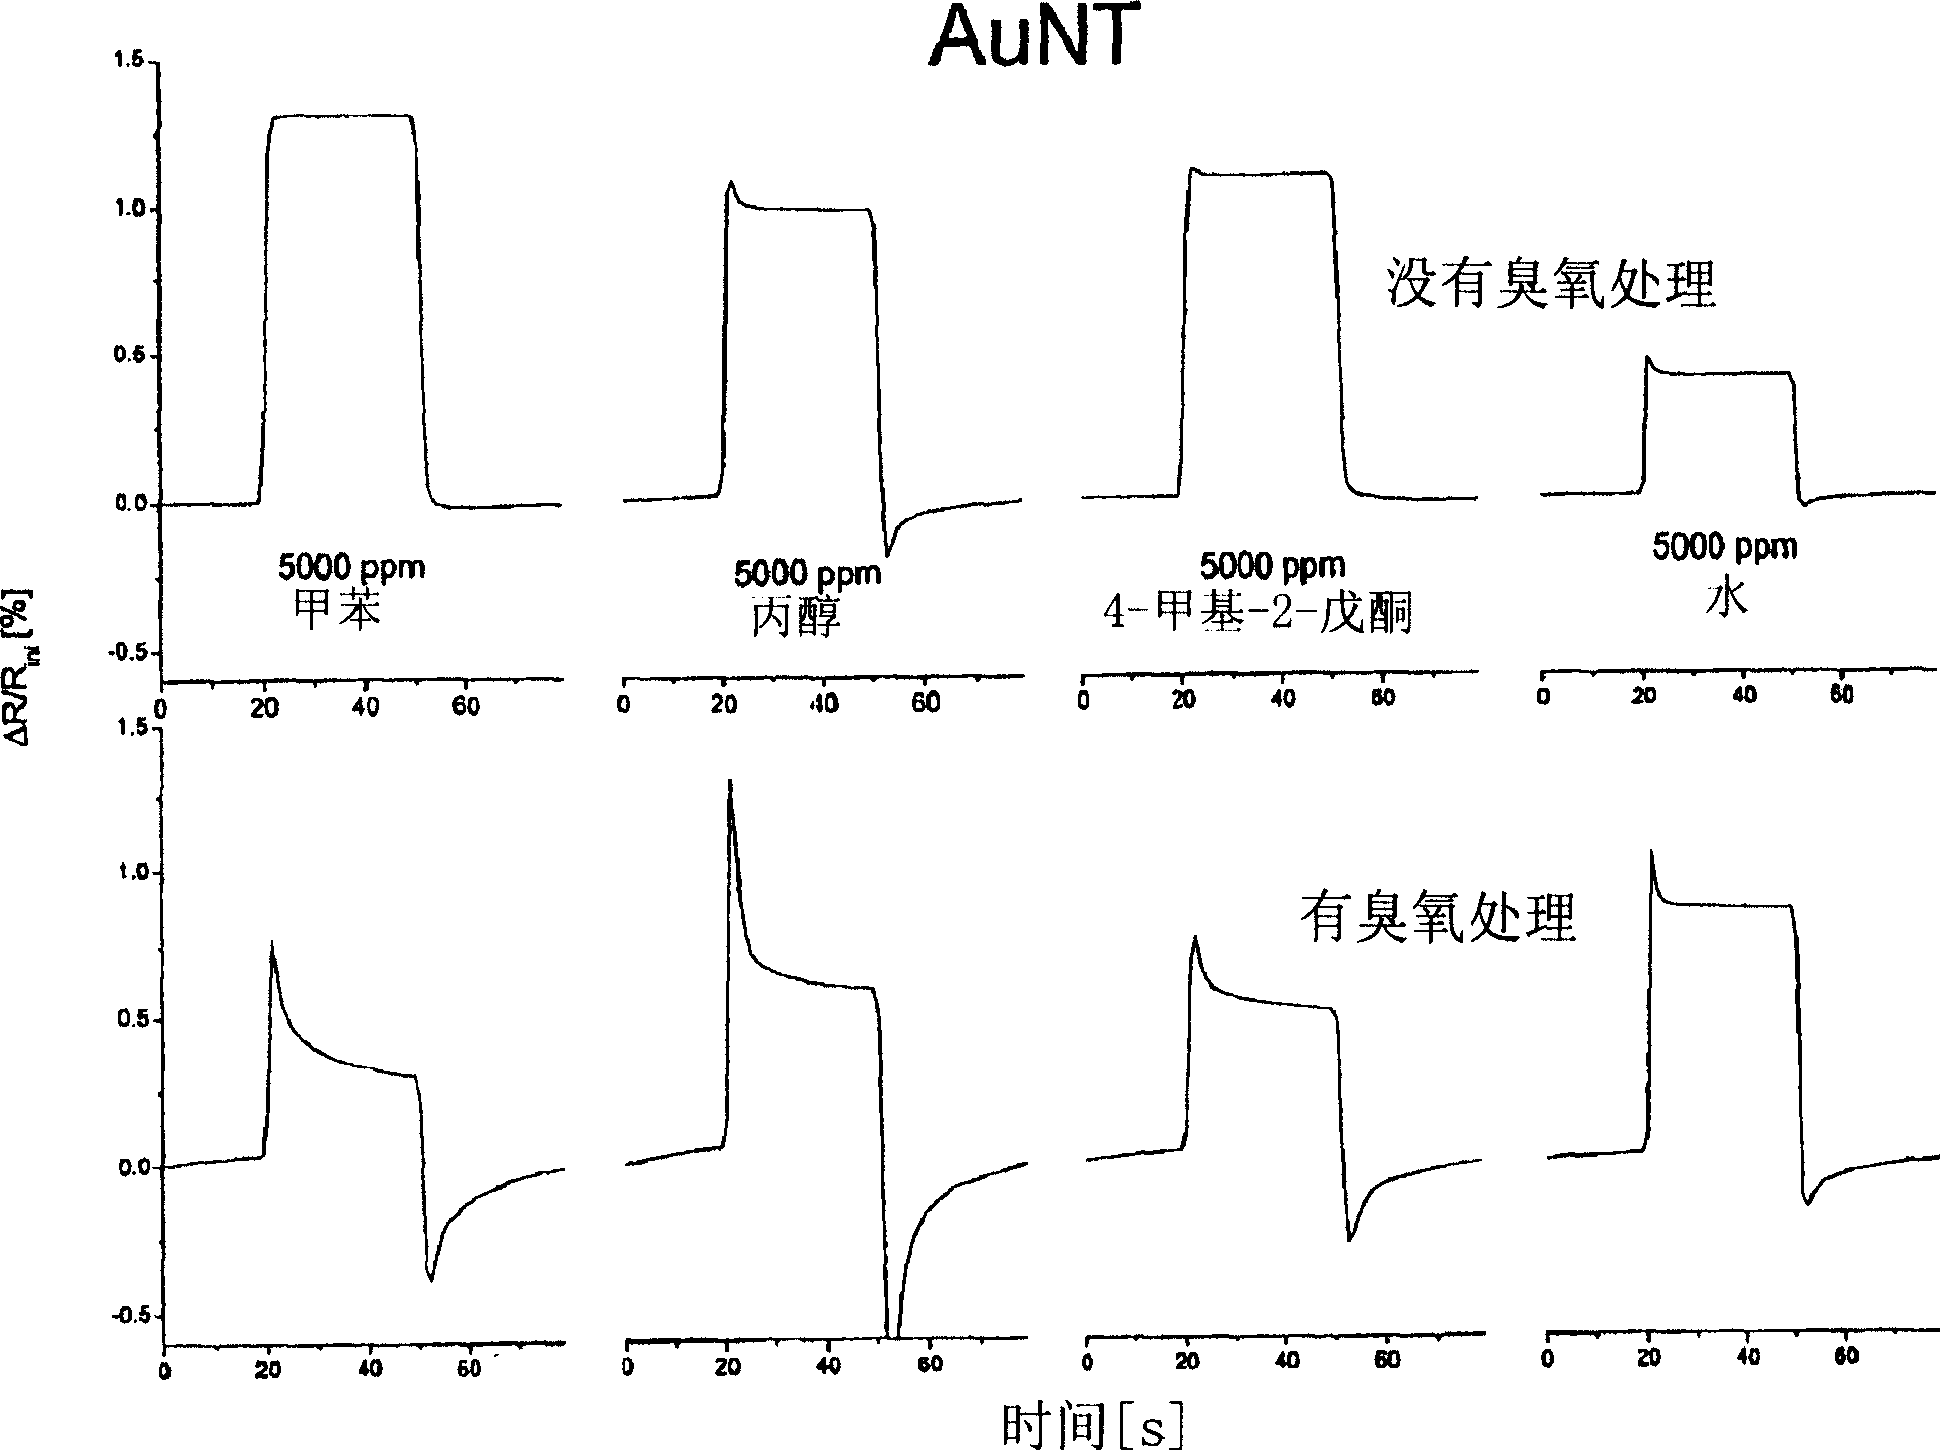 A method of altering the sensitivity and/or selectivity of a chemiresistor sensor array